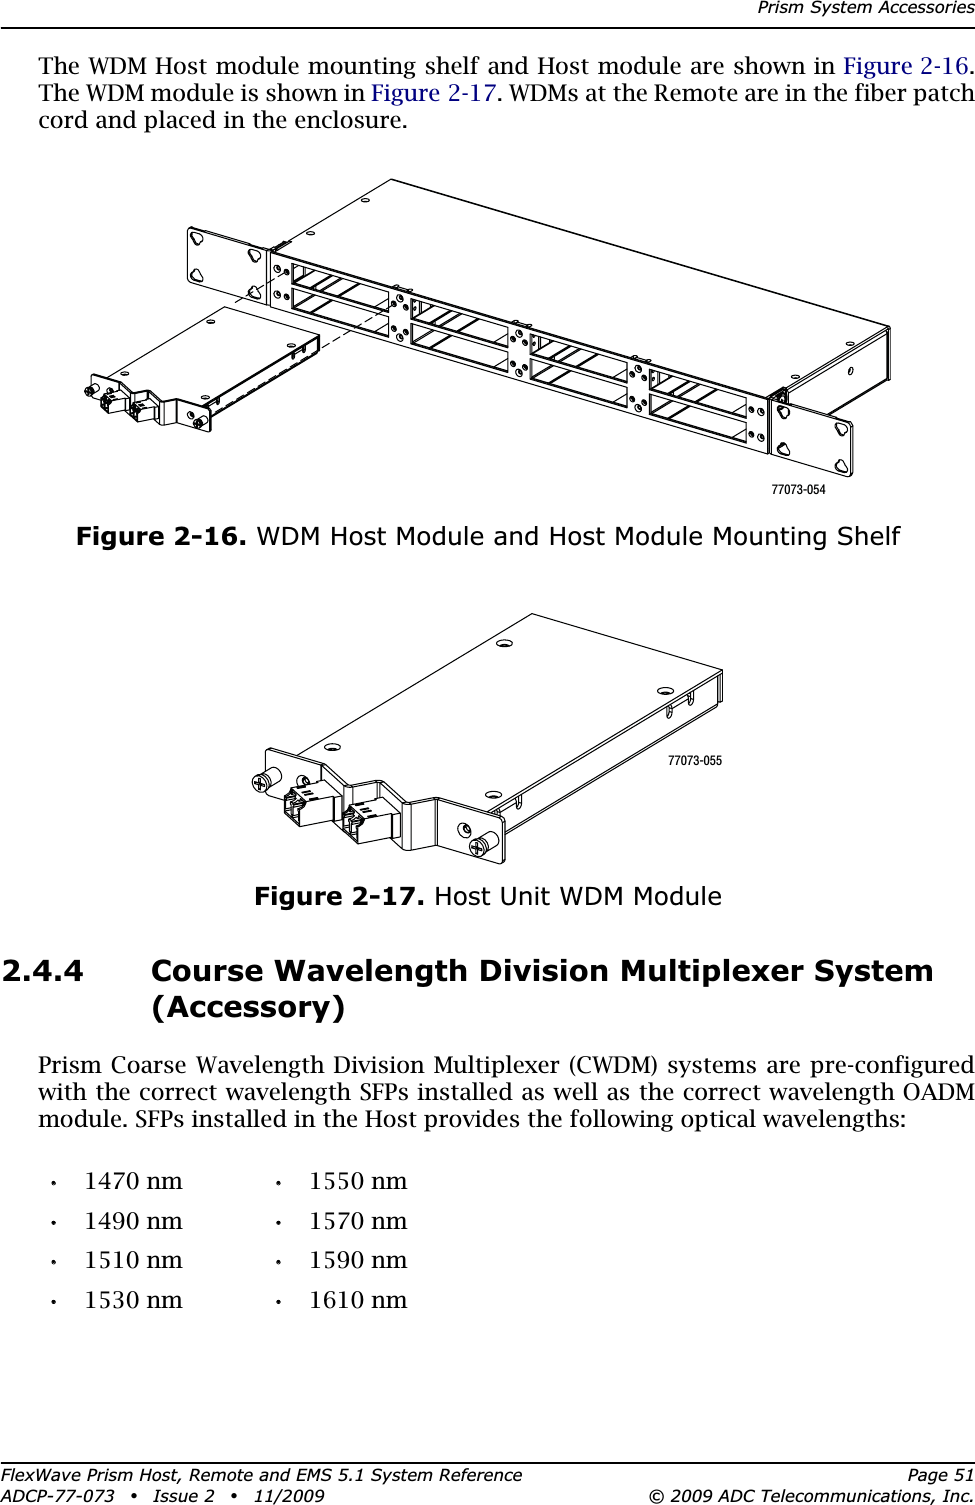 Prism System AccessoriesFlexWave Prism Host, Remote and EMS 5.1 System Reference Page 51ADCP-77-073 • Issue 2 • 11/2009 © 2009 ADC Telecommunications, Inc.The WDM Host module mounting shelf and Host module are shown in Figure 2-16.The WDM module is shown in Figure 2-17. WDMs at the Remote are in the fiber patch cord and placed in the enclosure.Figure 2-16. WDM Host Module and Host Module Mounting ShelfFigure 2-17. Host Unit WDM Module2.4.4 Course Wavelength Division Multiplexer System (Accessory)Prism Coarse Wavelength Division Multiplexer (CWDM) systems are pre-configured with the correct wavelength SFPs installed as well as the correct wavelength OADM module. SFPs installed in the Host provides the following optical wavelengths:•• 1470 nm •• 1550 nm•• 1490 nm •• 1570 nm•• 1510 nm •• 1590 nm•• 1530 nm •• 1610 nm77073-05477073-055